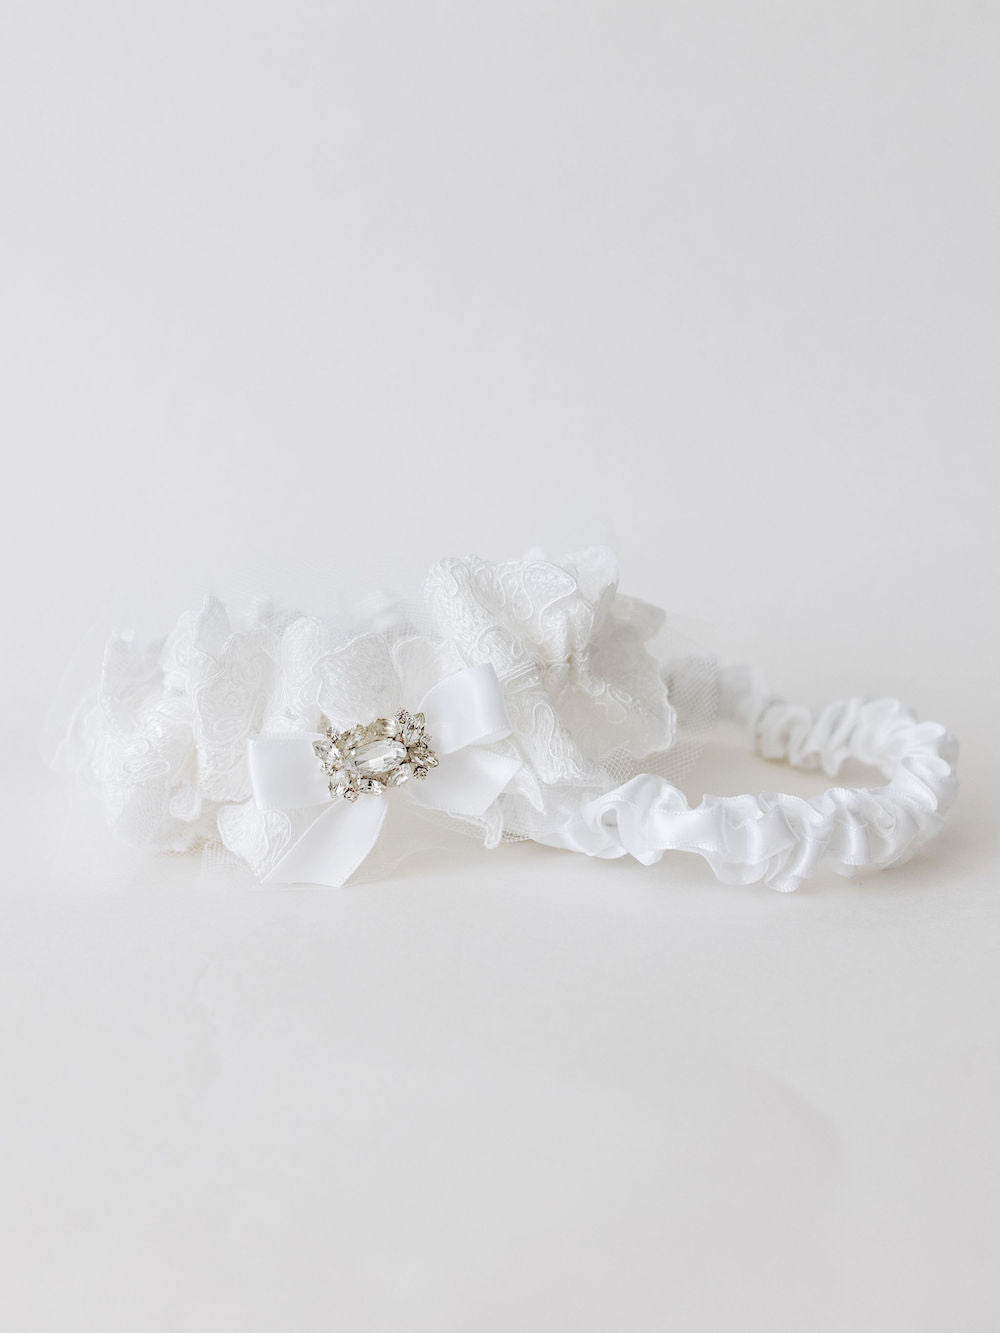 custom wedding garter set heirlooms with sparkle and tulle material from bride's wedding dress handmade by The Garter Girl